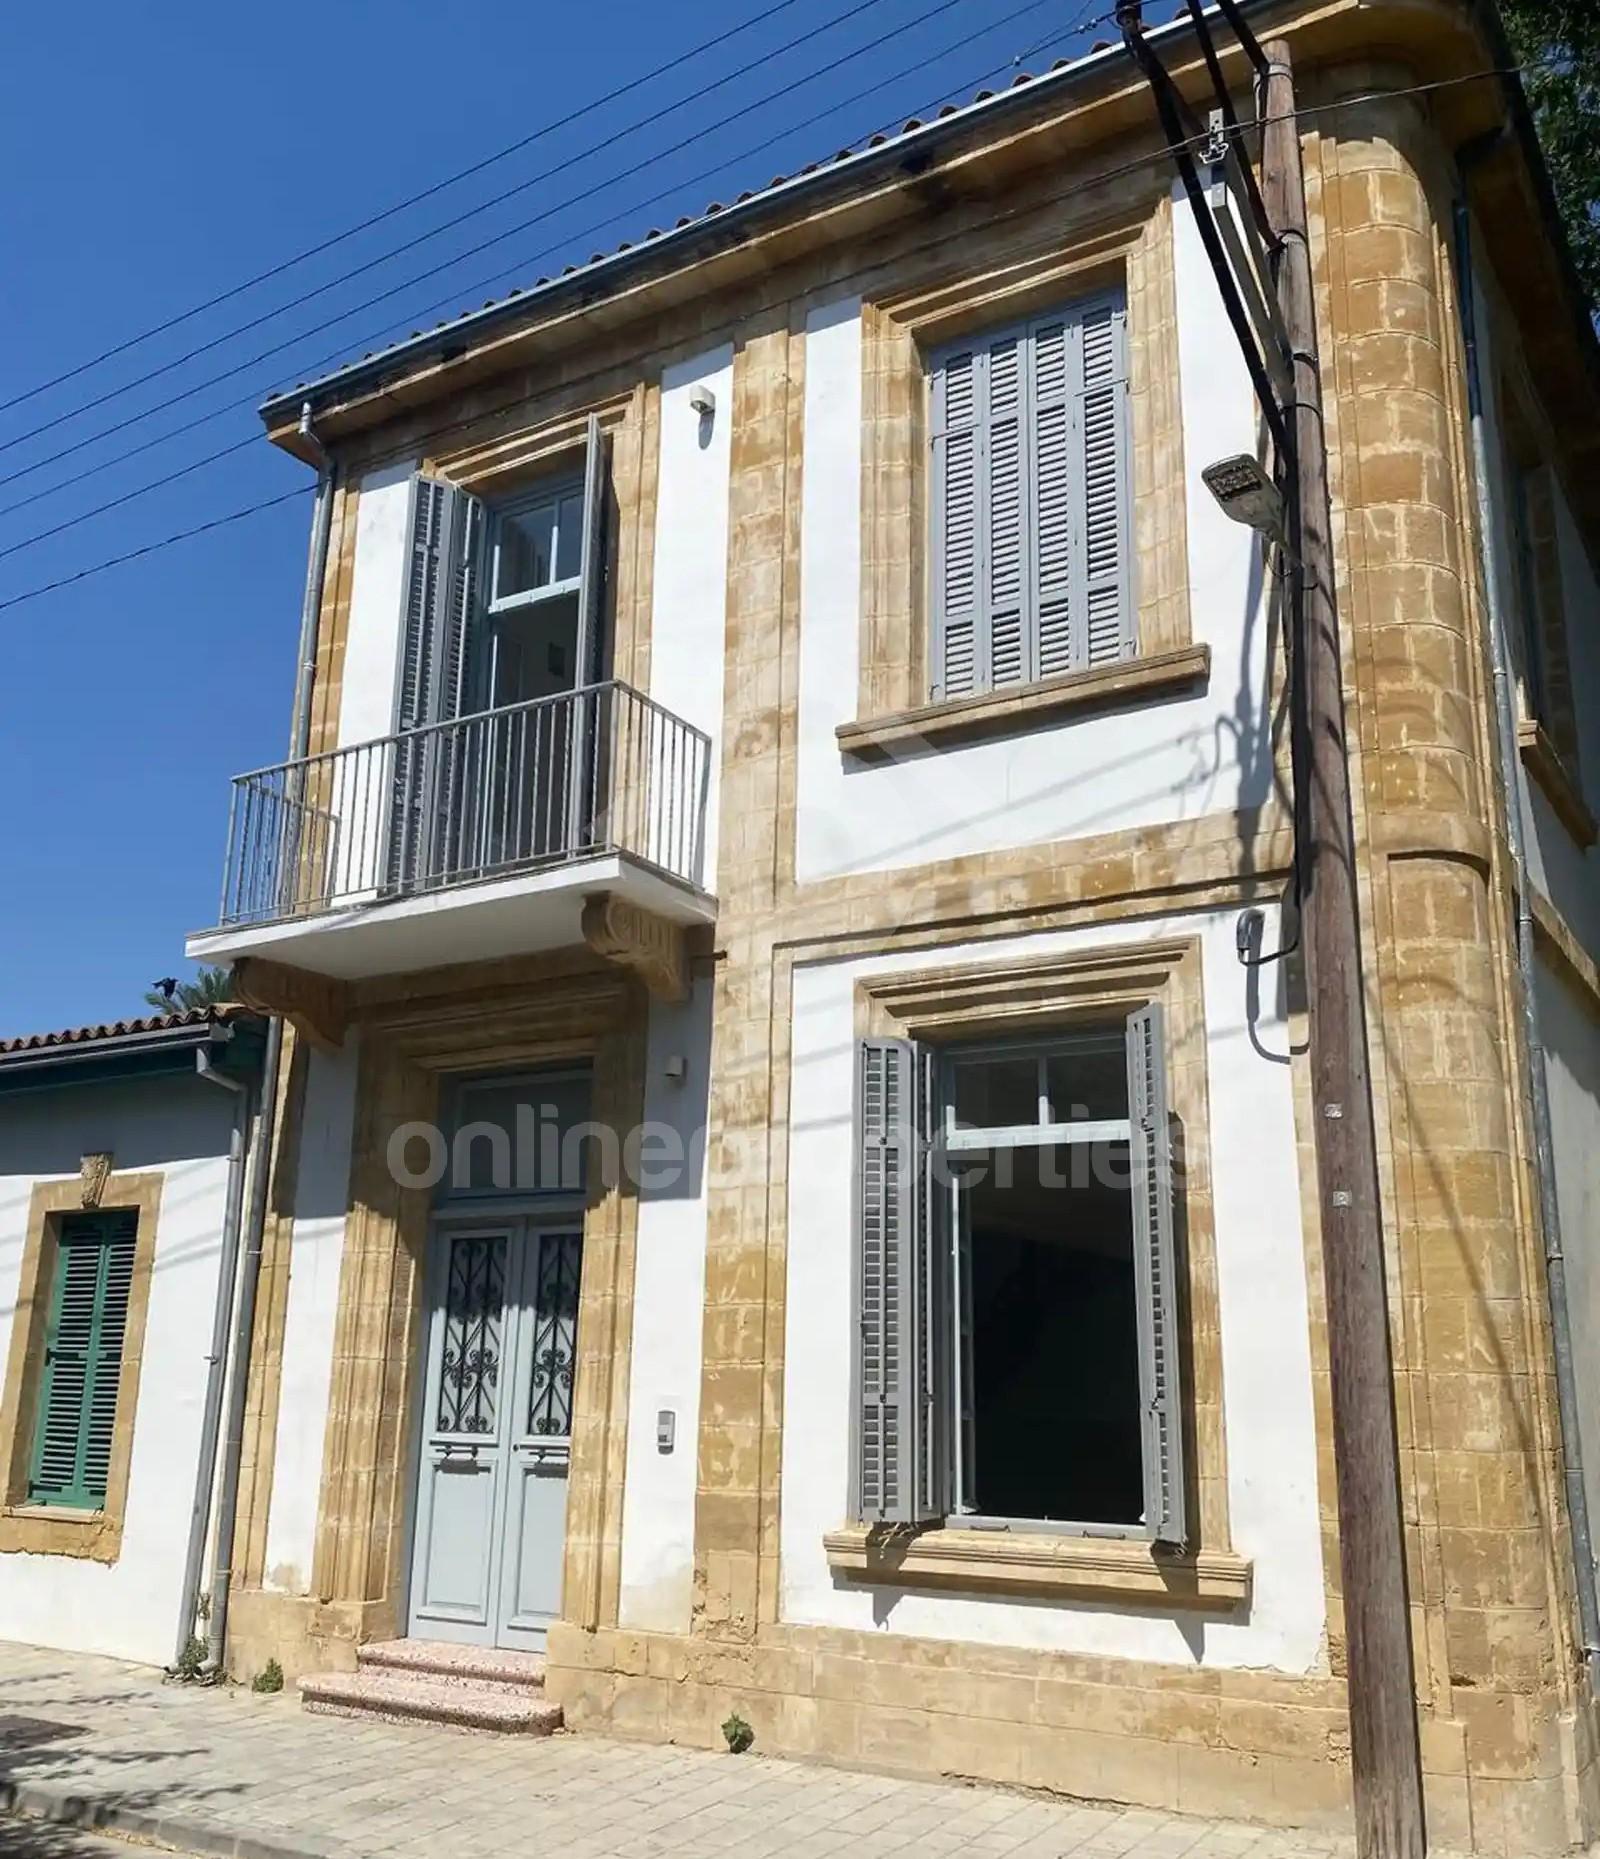 3-bedroom Listed House in the heart of the old town